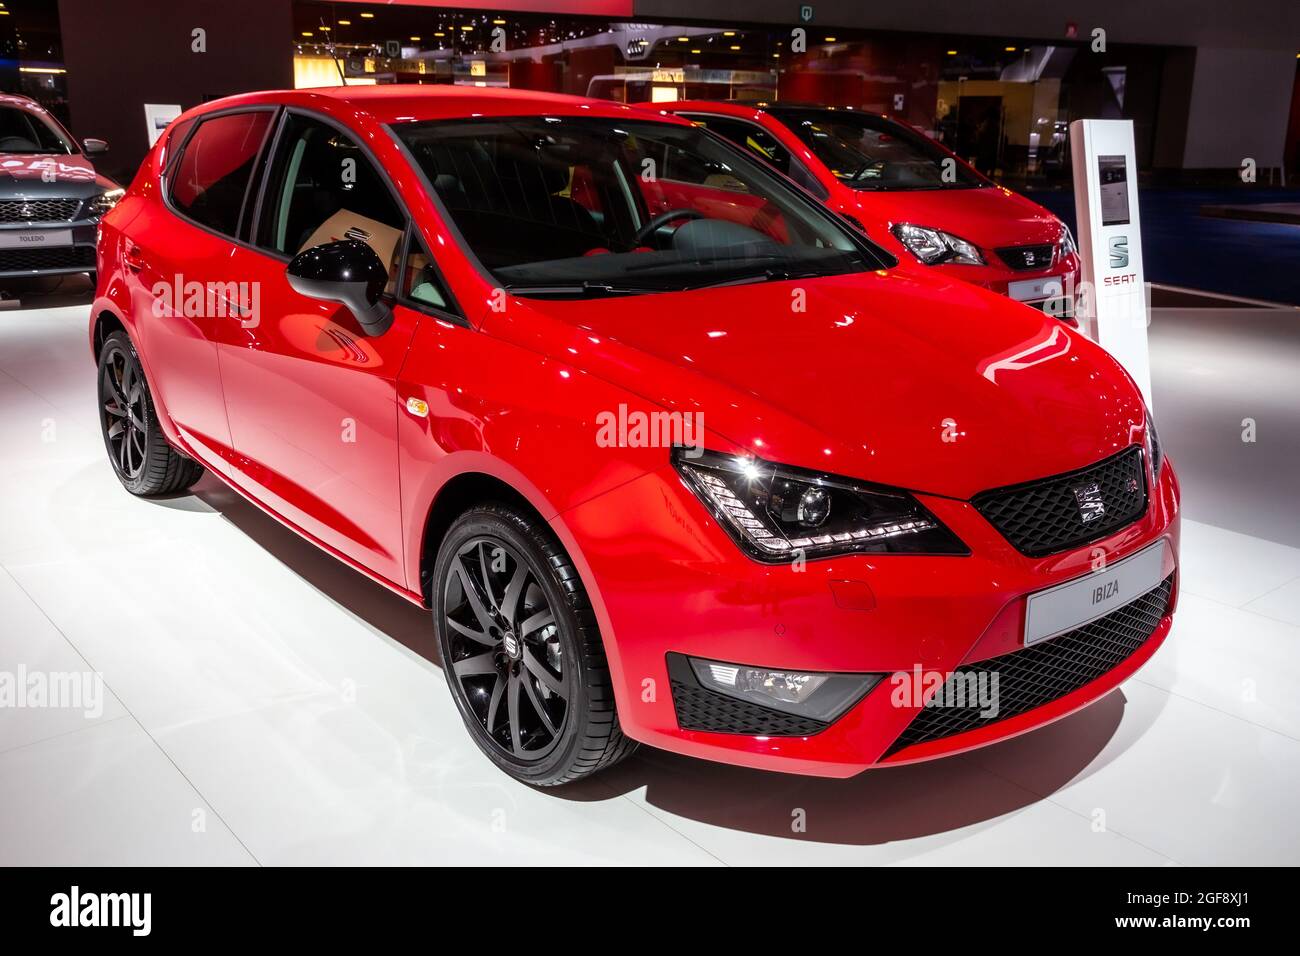 Seat Ibiza FR car showcased at the Brussels Expo Autosalon motor